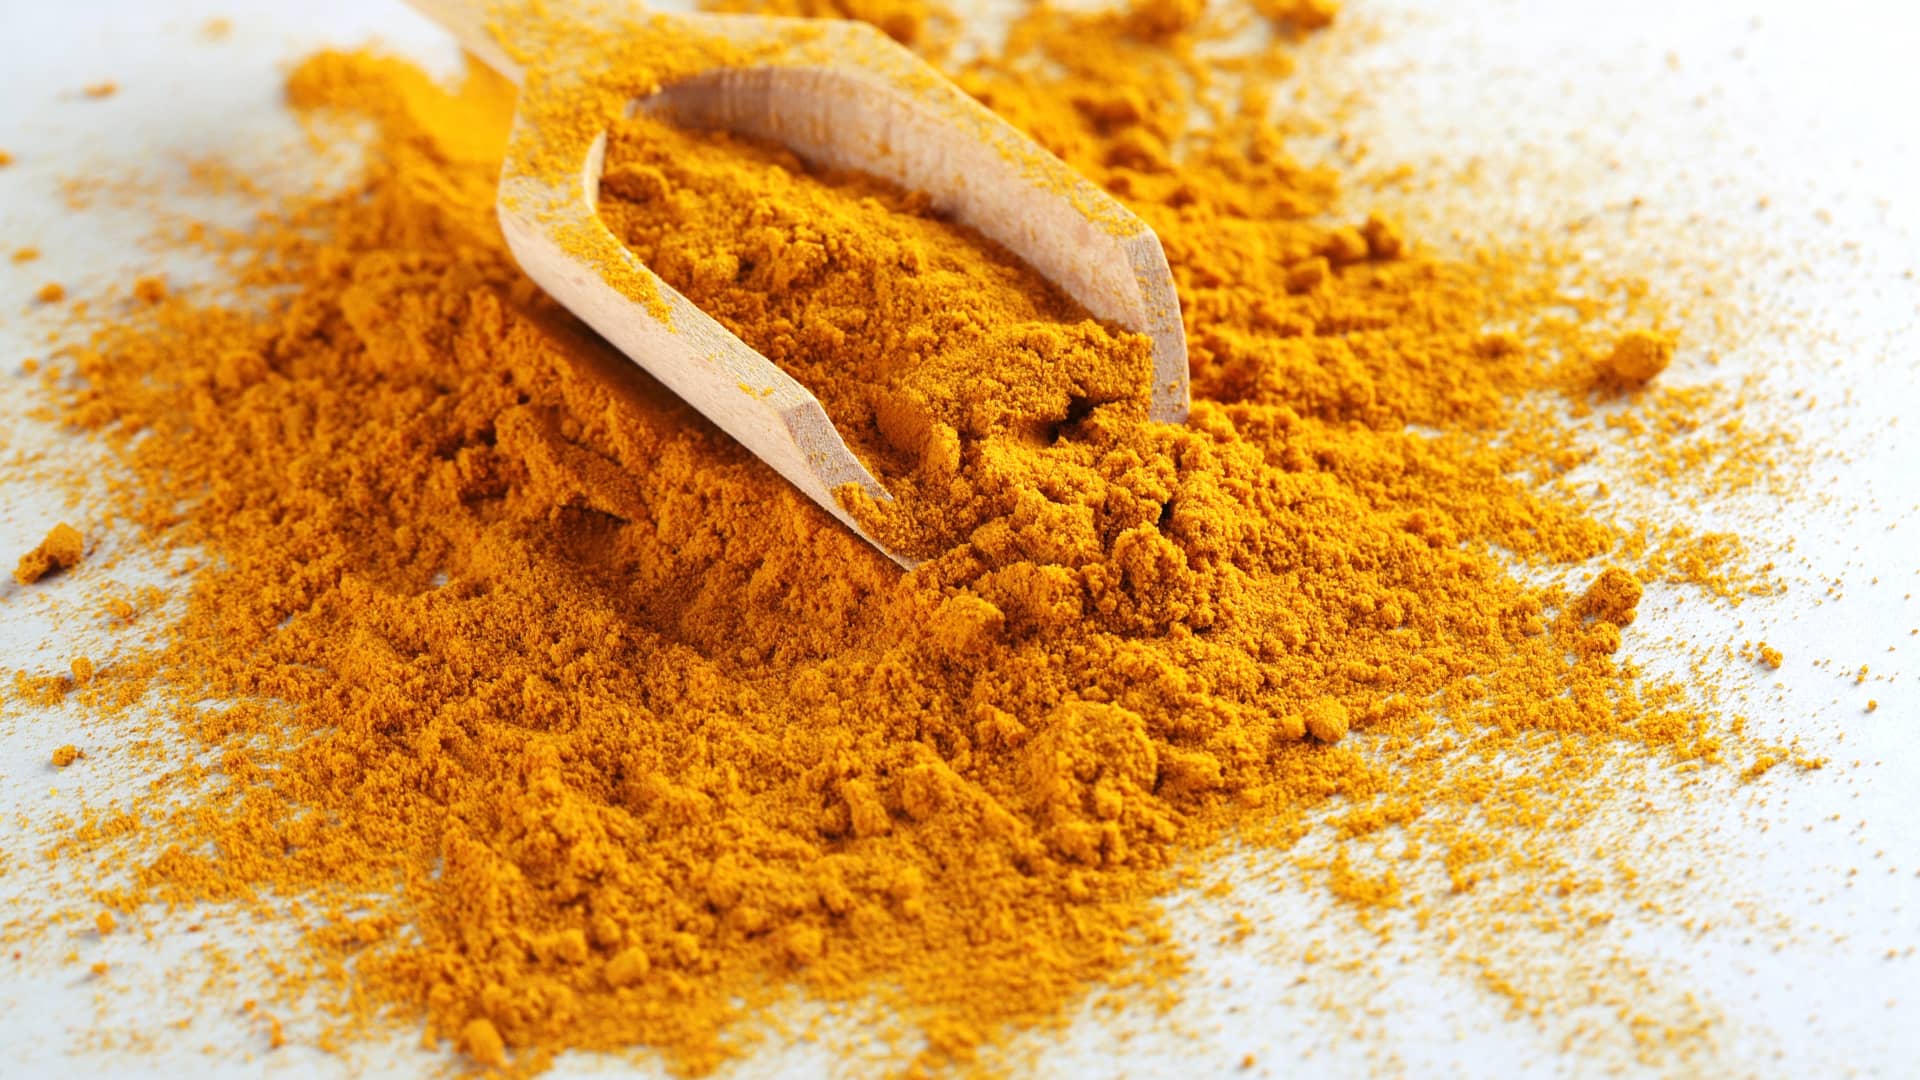 The bright yellow-orange root is not only a staple in Indian cooking, but it contains a magical compound called curcumin.